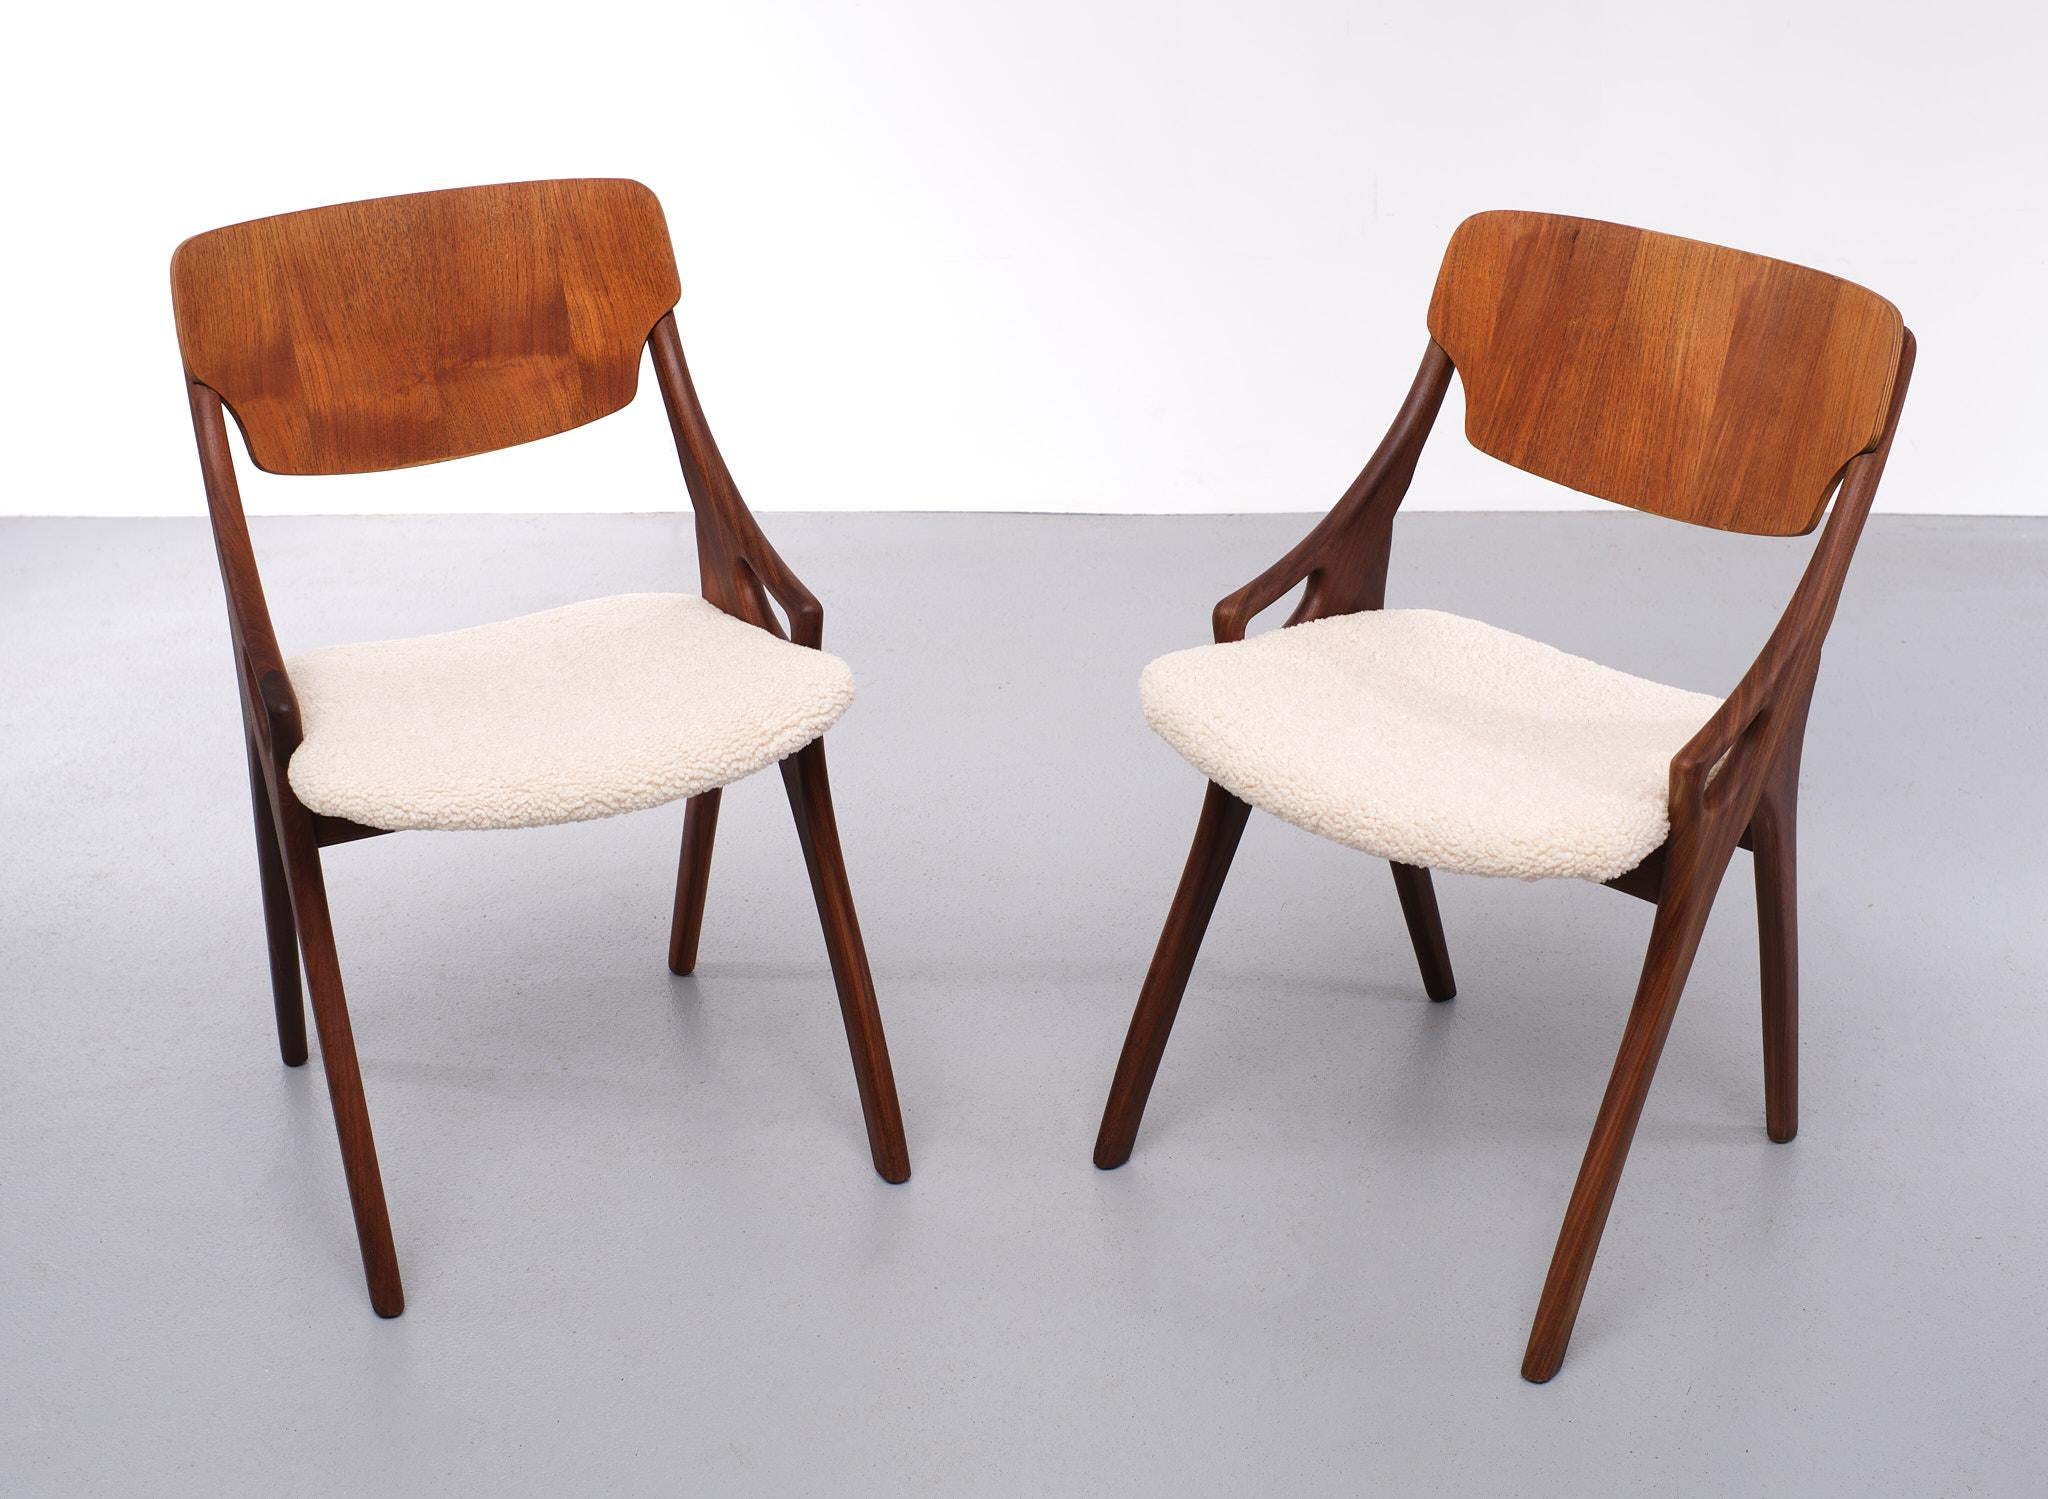 Beautiful organic Danish design by Arne Hovland Olsen for Mogens Kold Furniture. 1950/1960 Solid Teak wood. Comes with a Brand new Wool upholstery. Good condition.
  